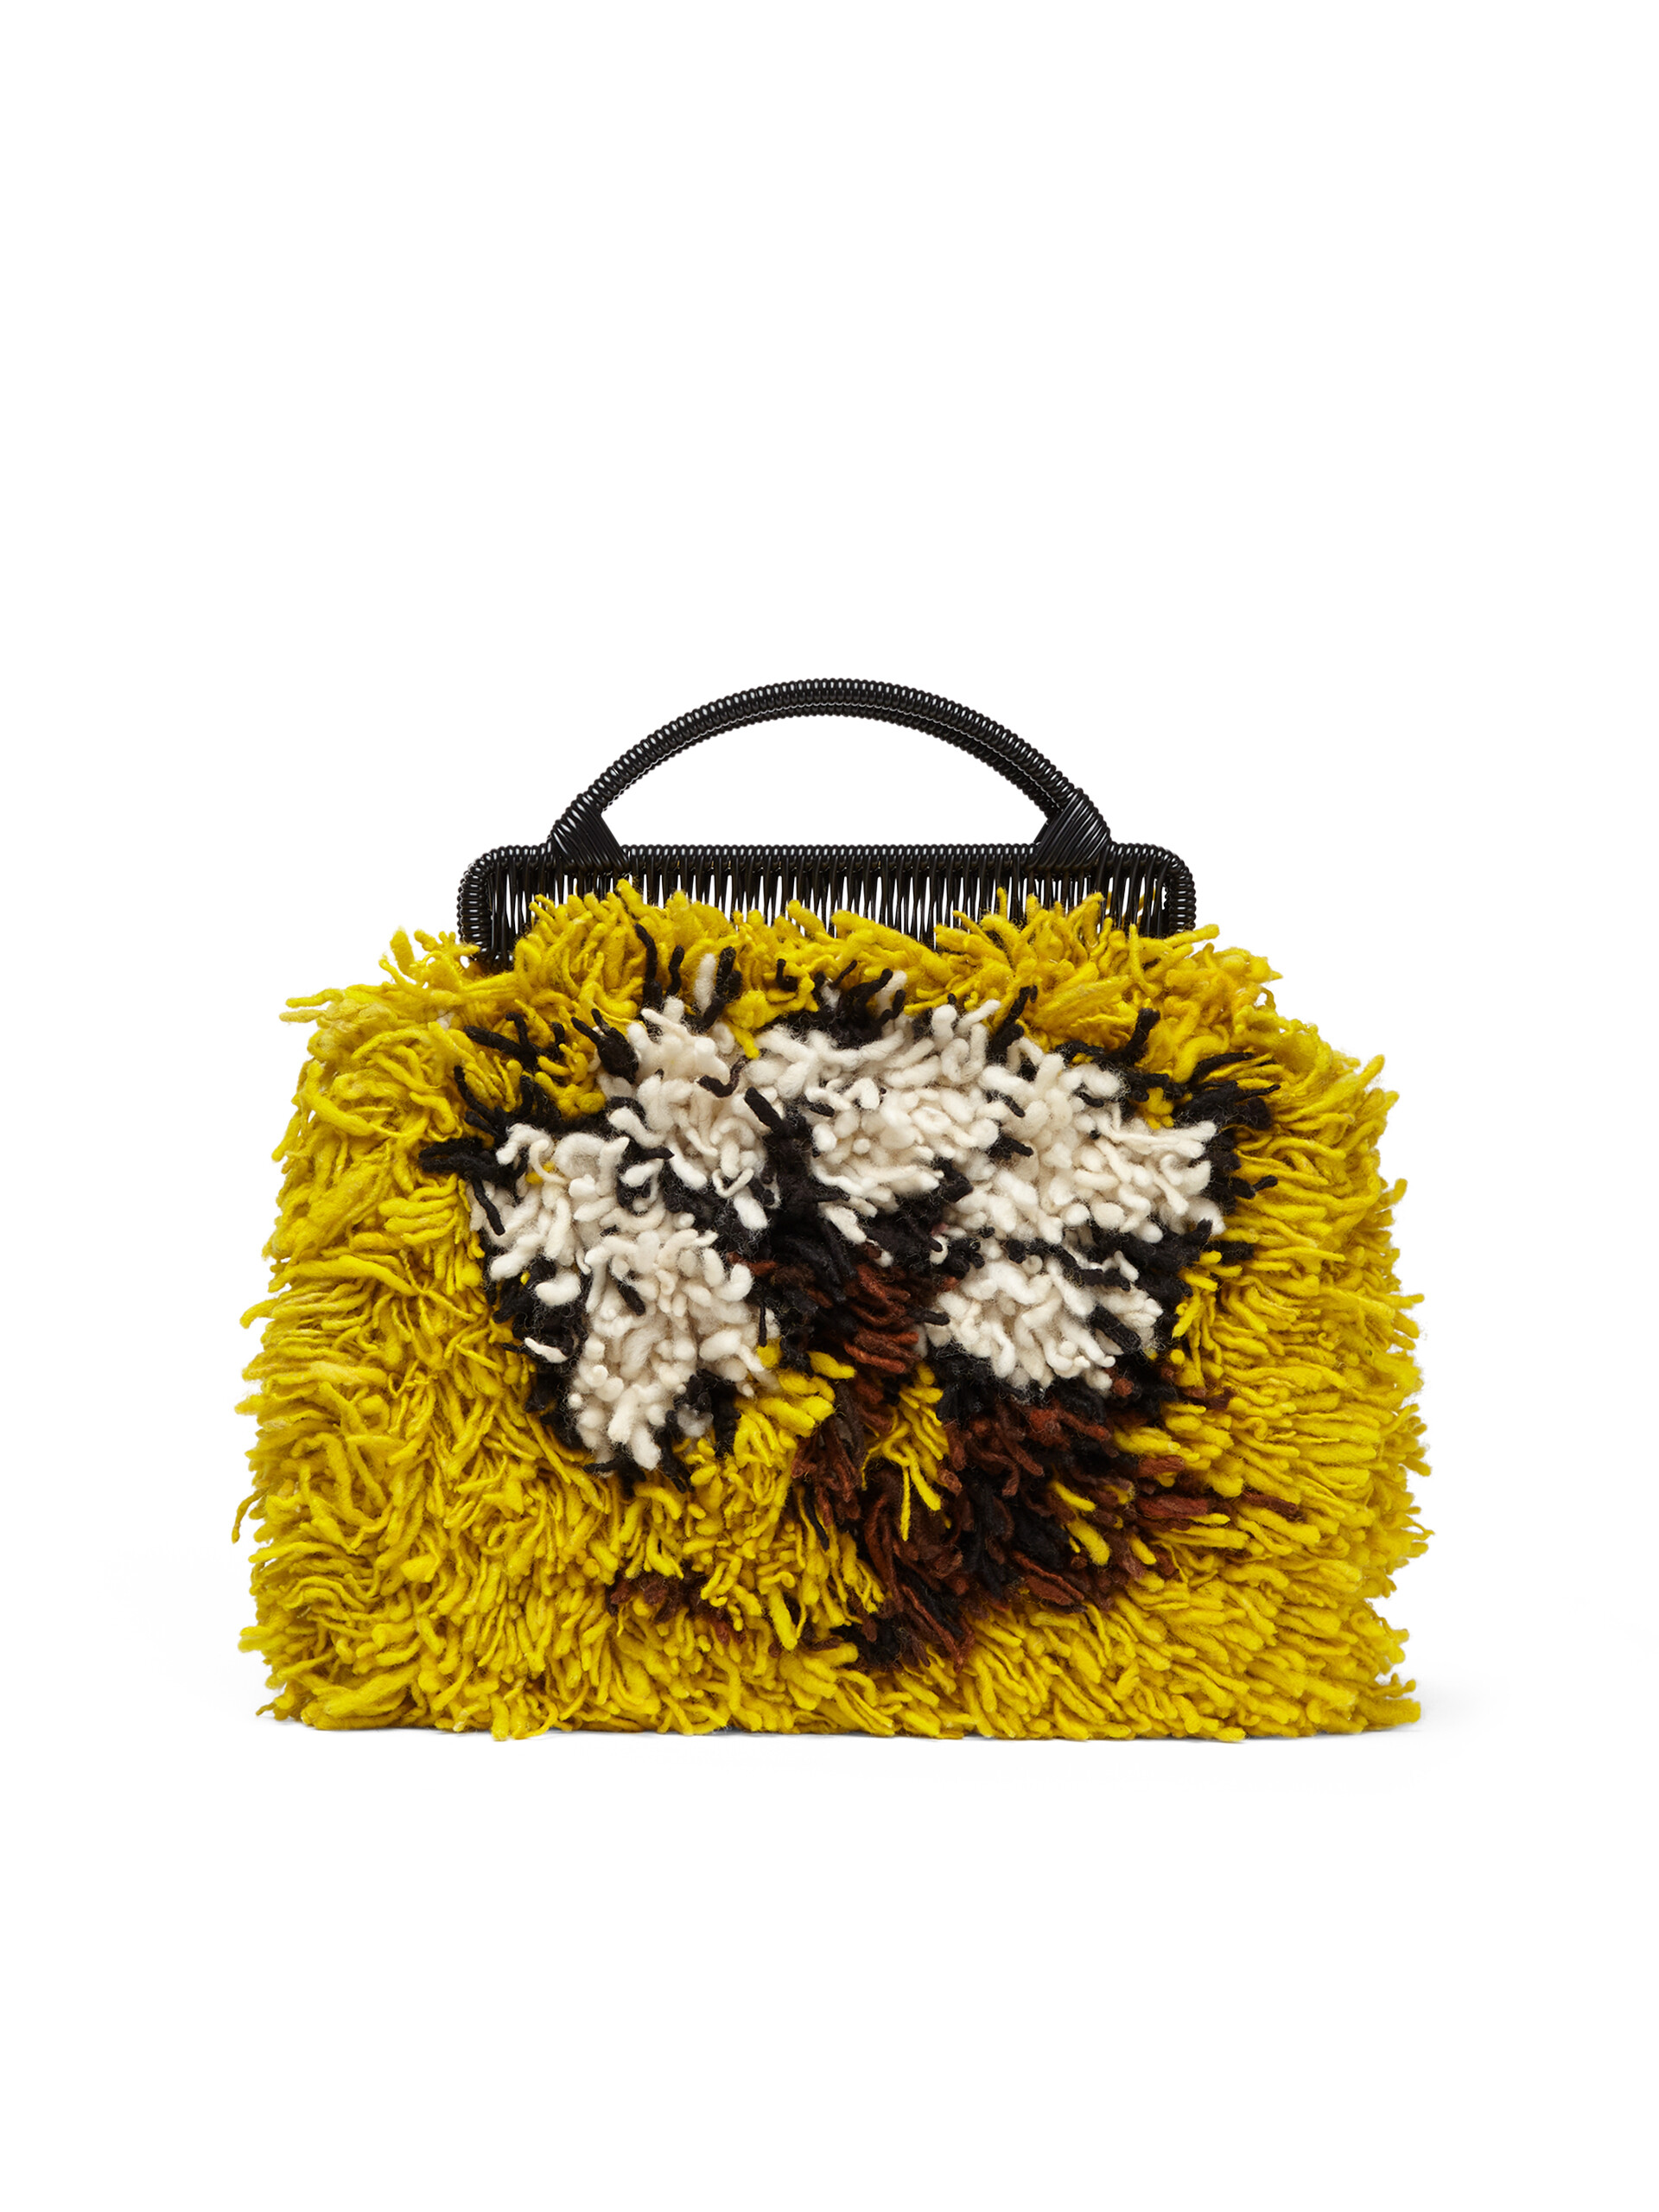 MARNI MARKET multicoloured frame bag in yellow brown and white long wool - Furniture - Image 3